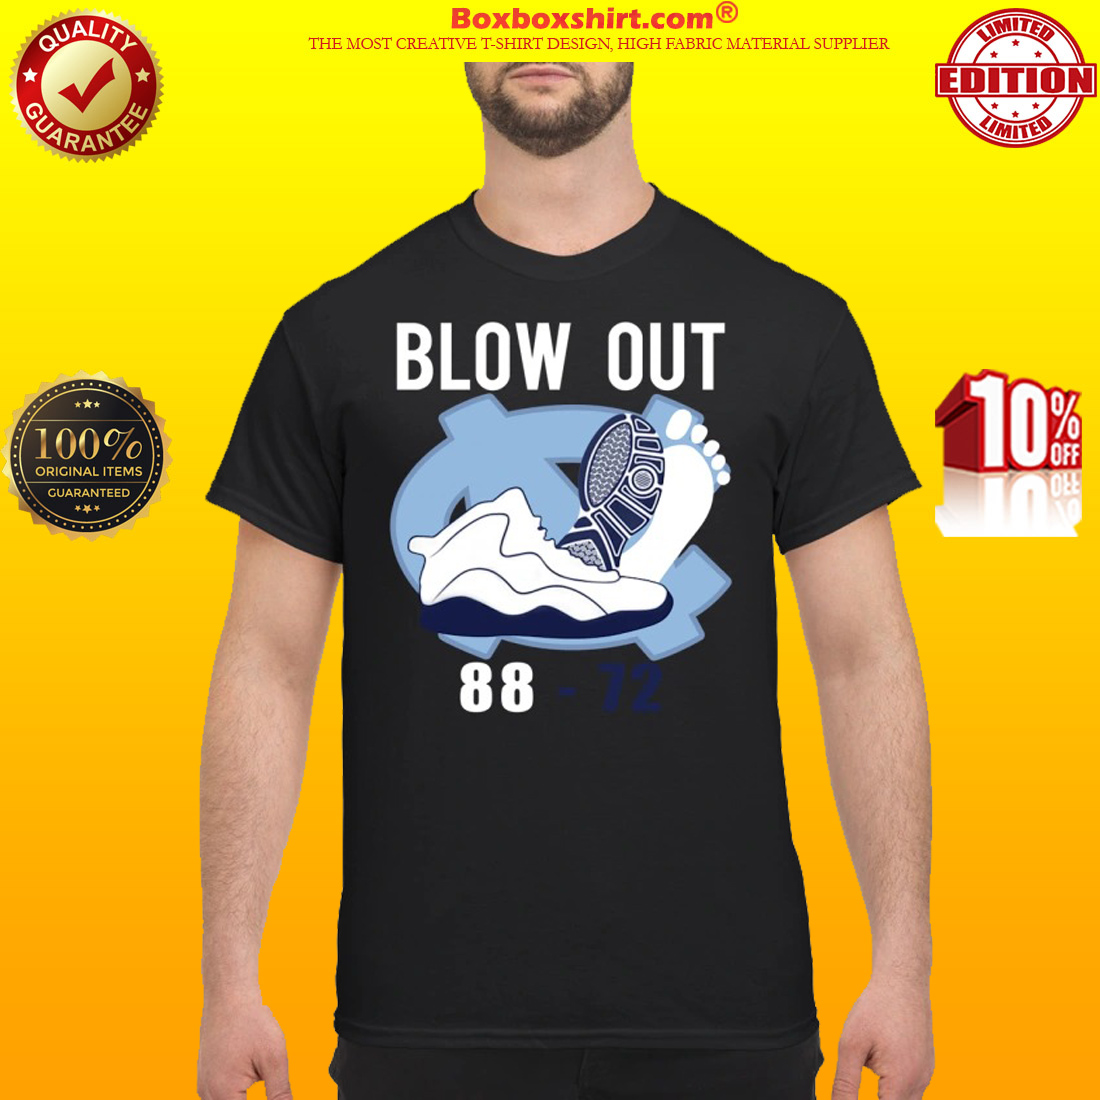 Blow out 88 72 classic shirt